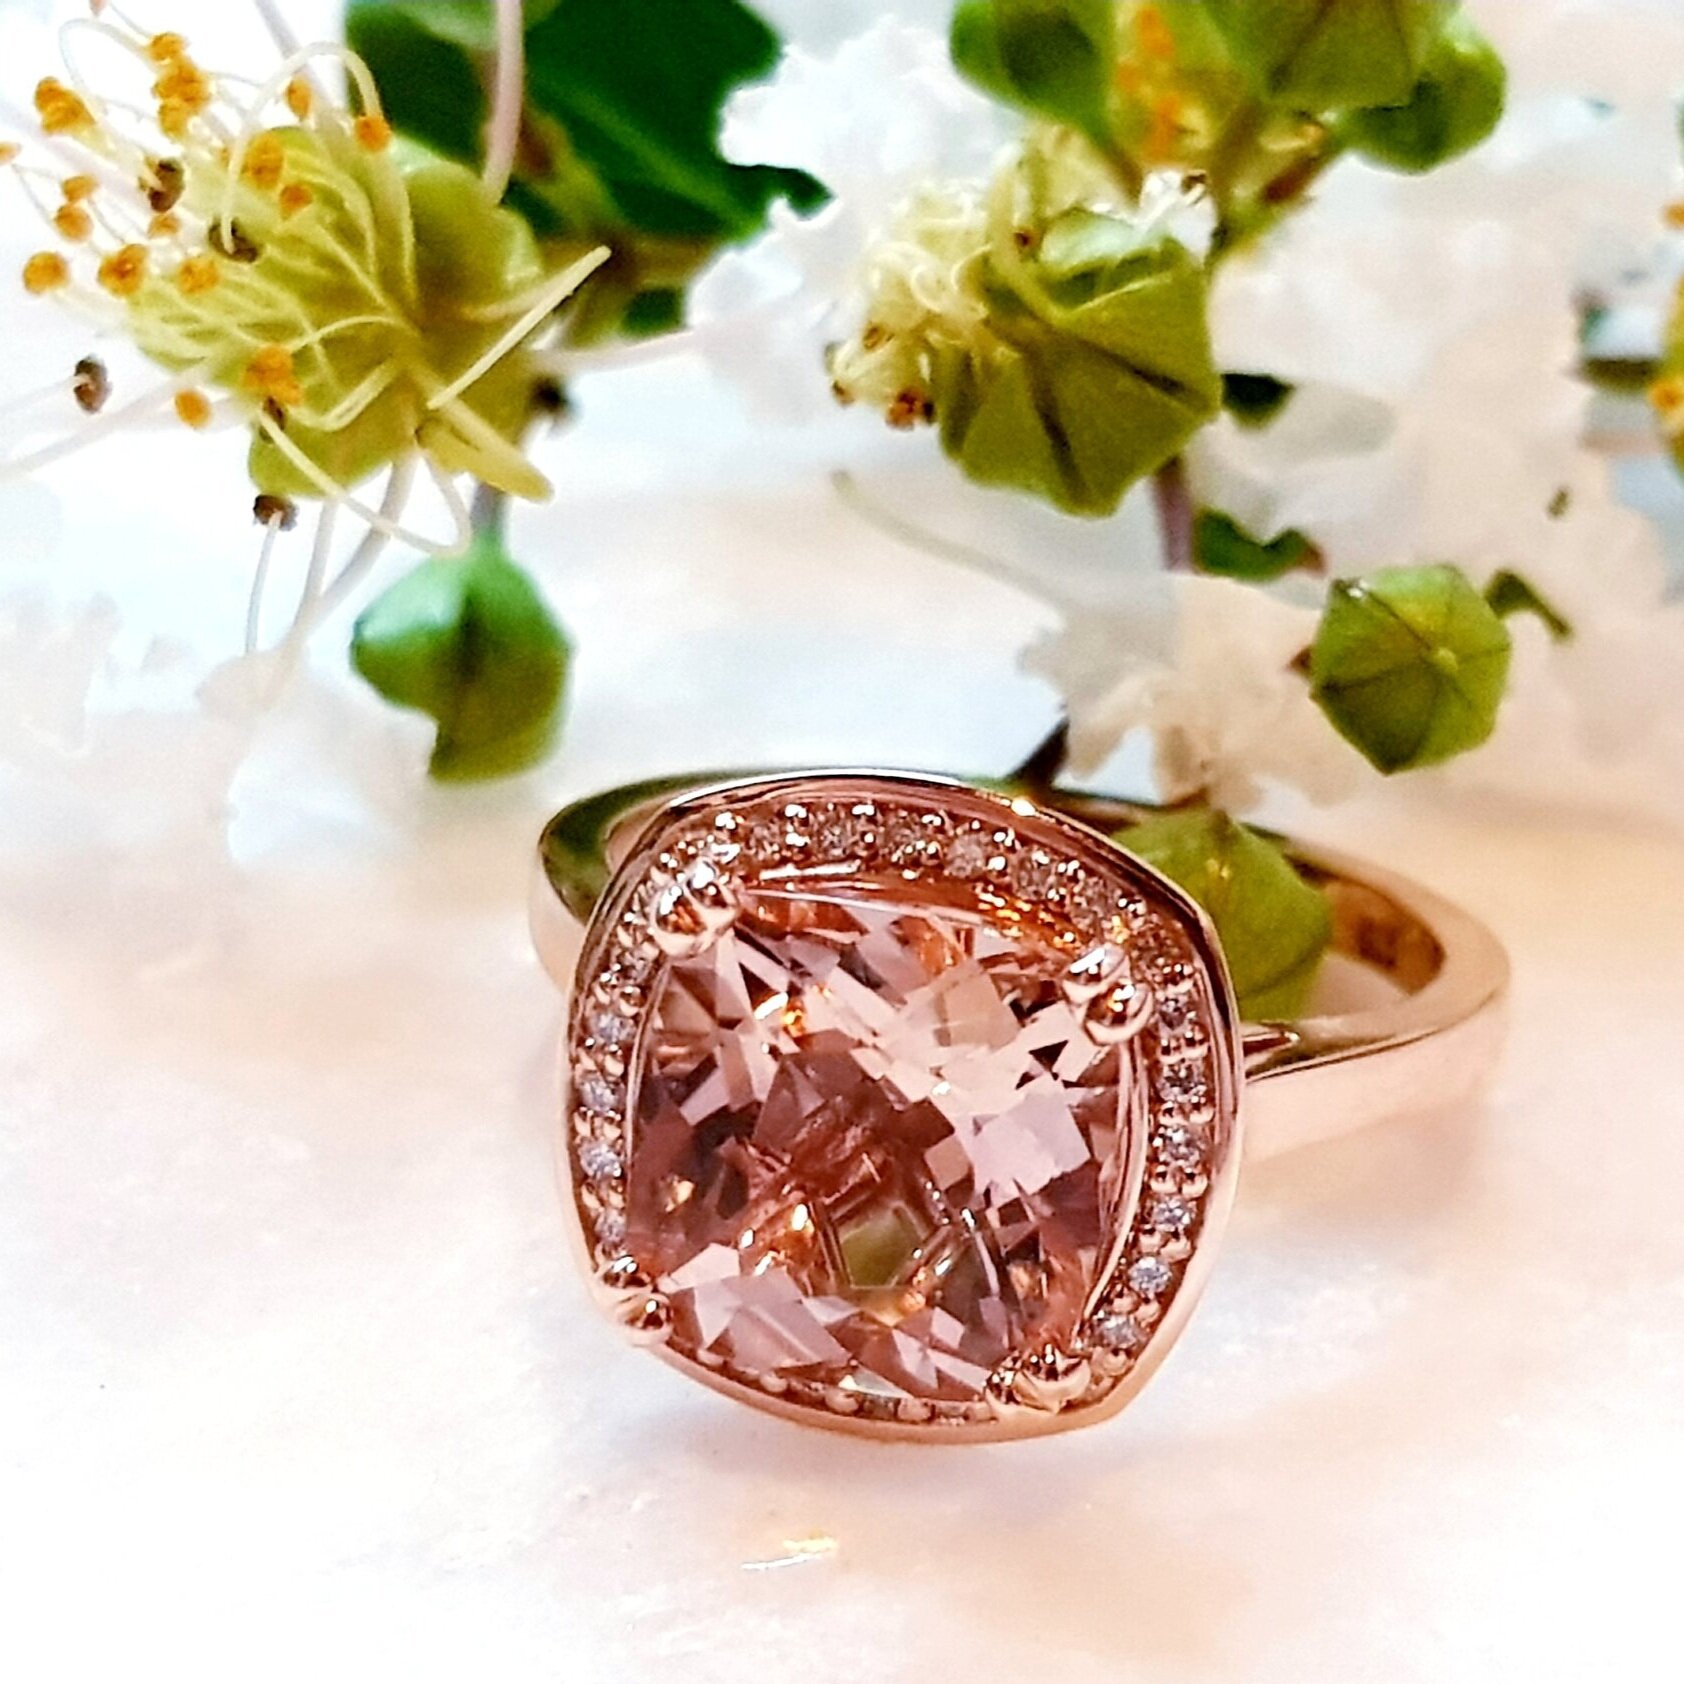 Rose+Gold+Square+Morganite+Dress+ring+with+diamond+halo+alternative+engagement+ring+custom+designed+jewellery+House+of+Frost+Jewellery.jpg